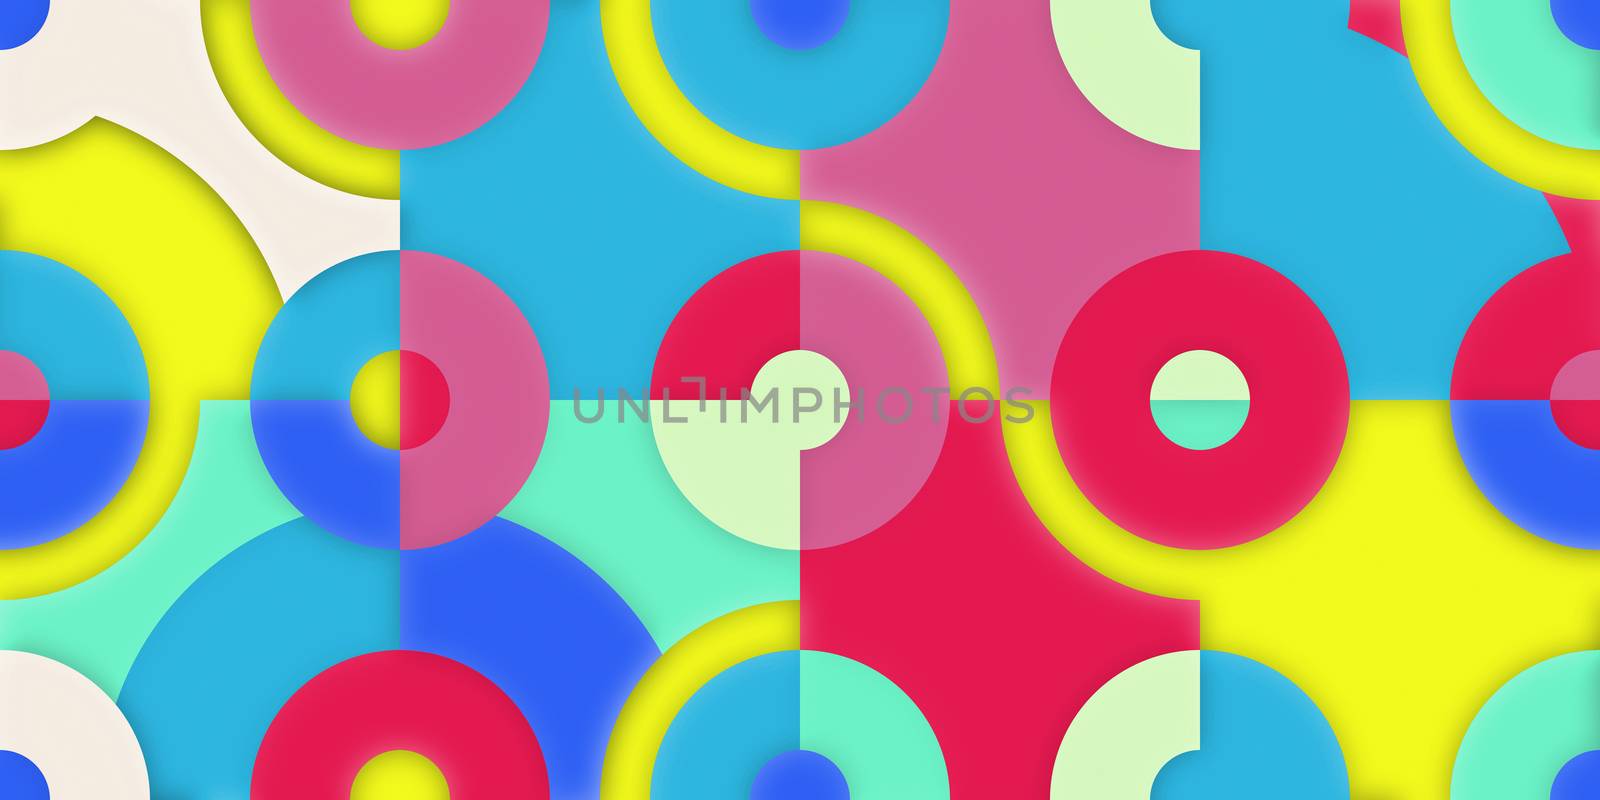 Circle Quarters Backgrounds. Seamless Bright Angles Textures. Abstract Colored Curves Patterns. by sanches812